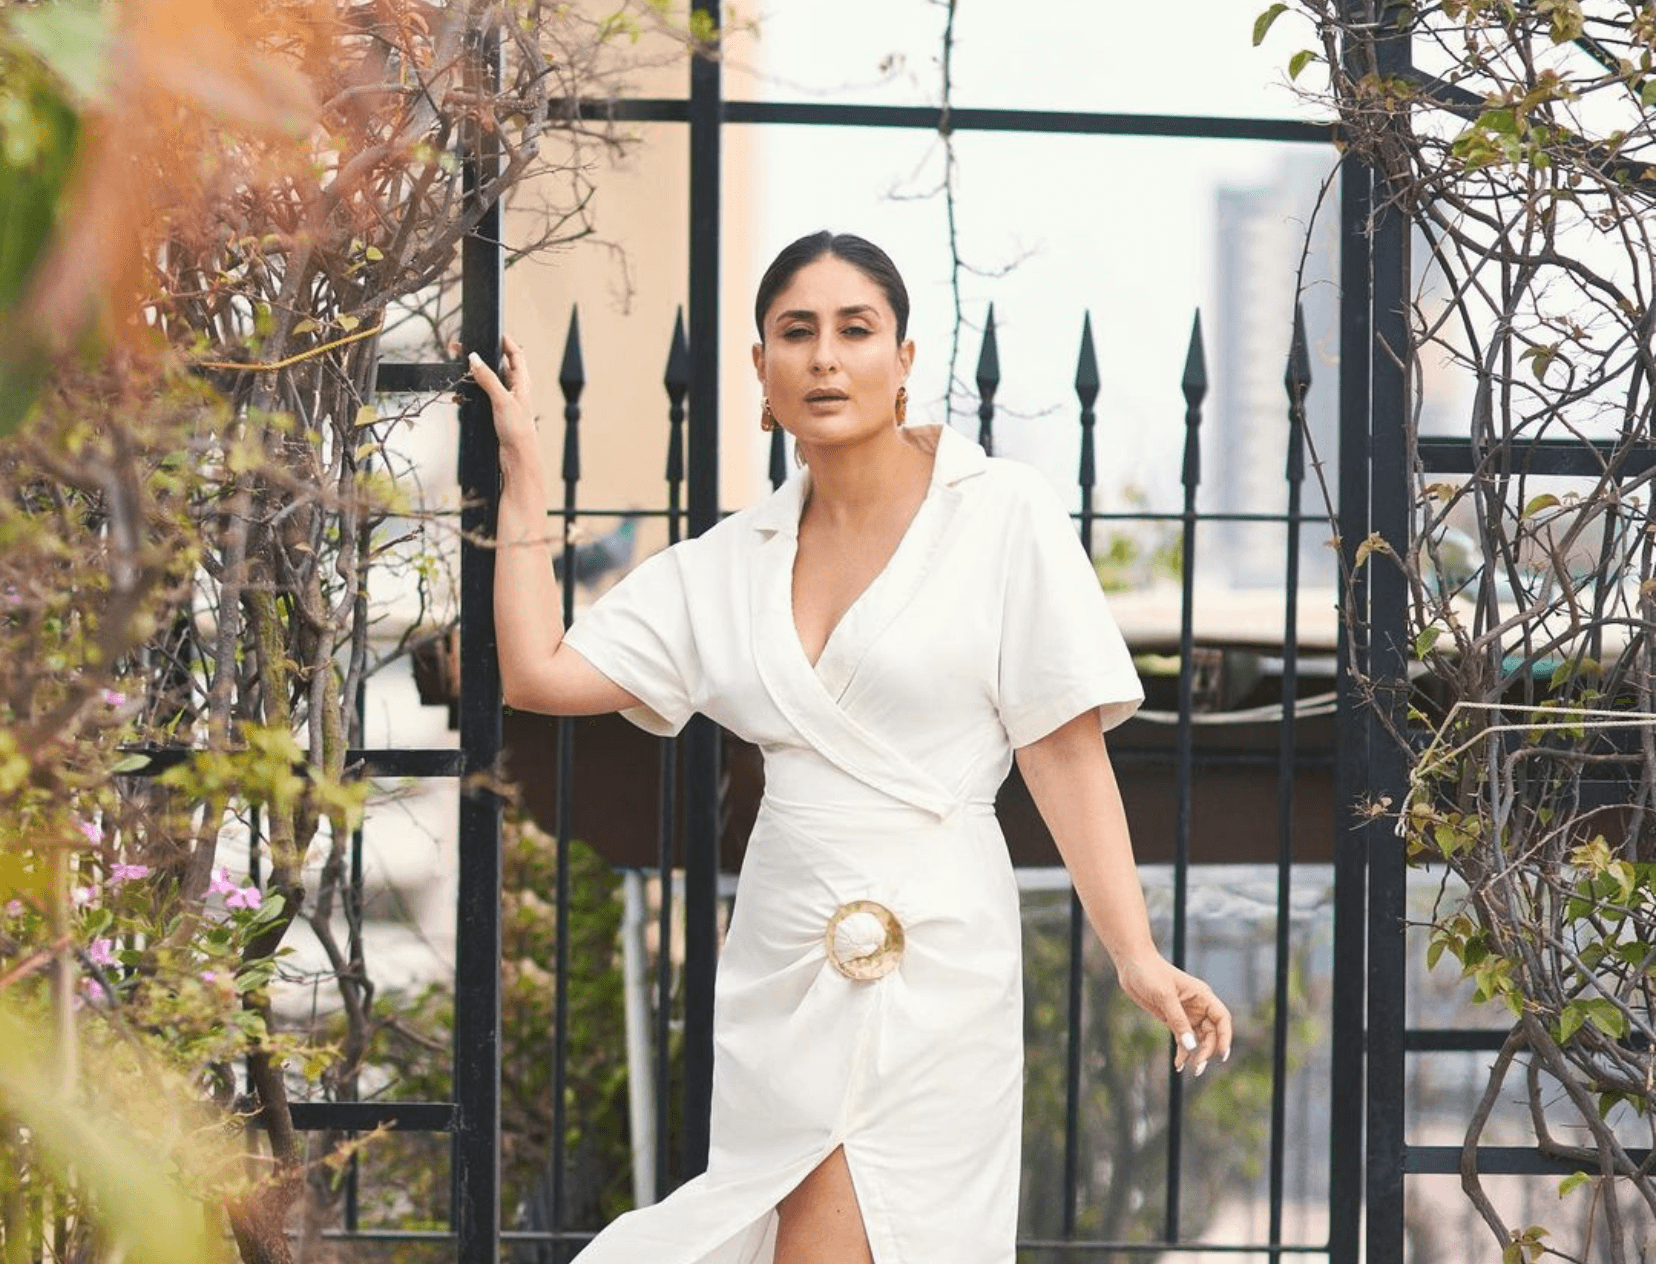 Kareena Kapoor Is Finally Making Her OTT Debut With The Most Unexpected Star Cast